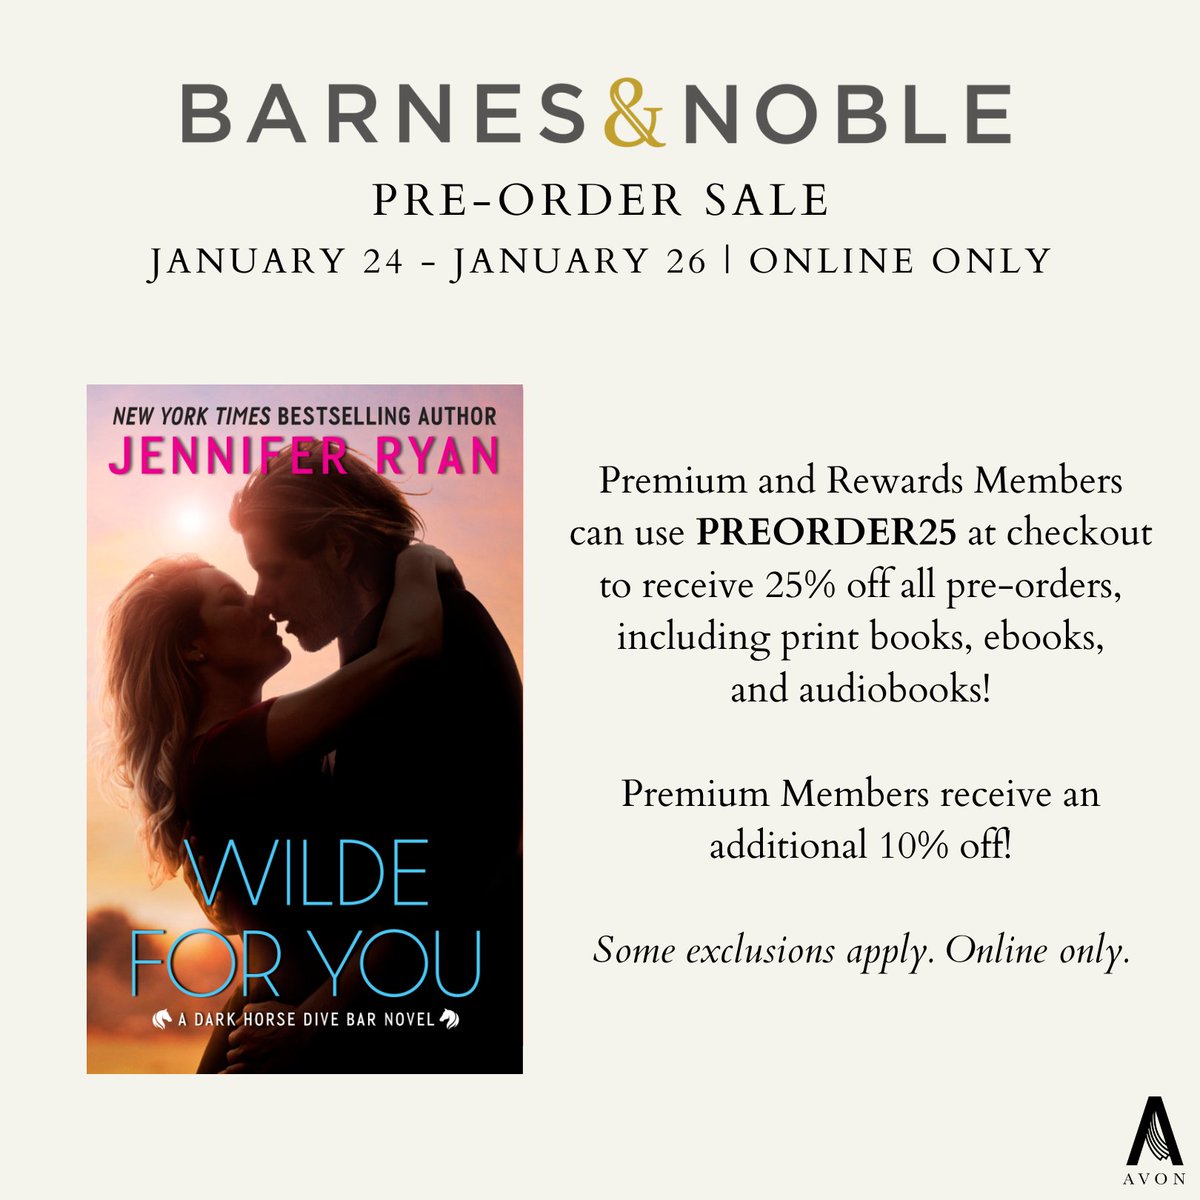 Preorder alert! WILDE FOR YOU - 3/26 He's not looking for love...until he meets her. She's looking for the perfect landscape to paint and a fresh start. She finds both on his ranch. tinyurl.com/ywzy8ers